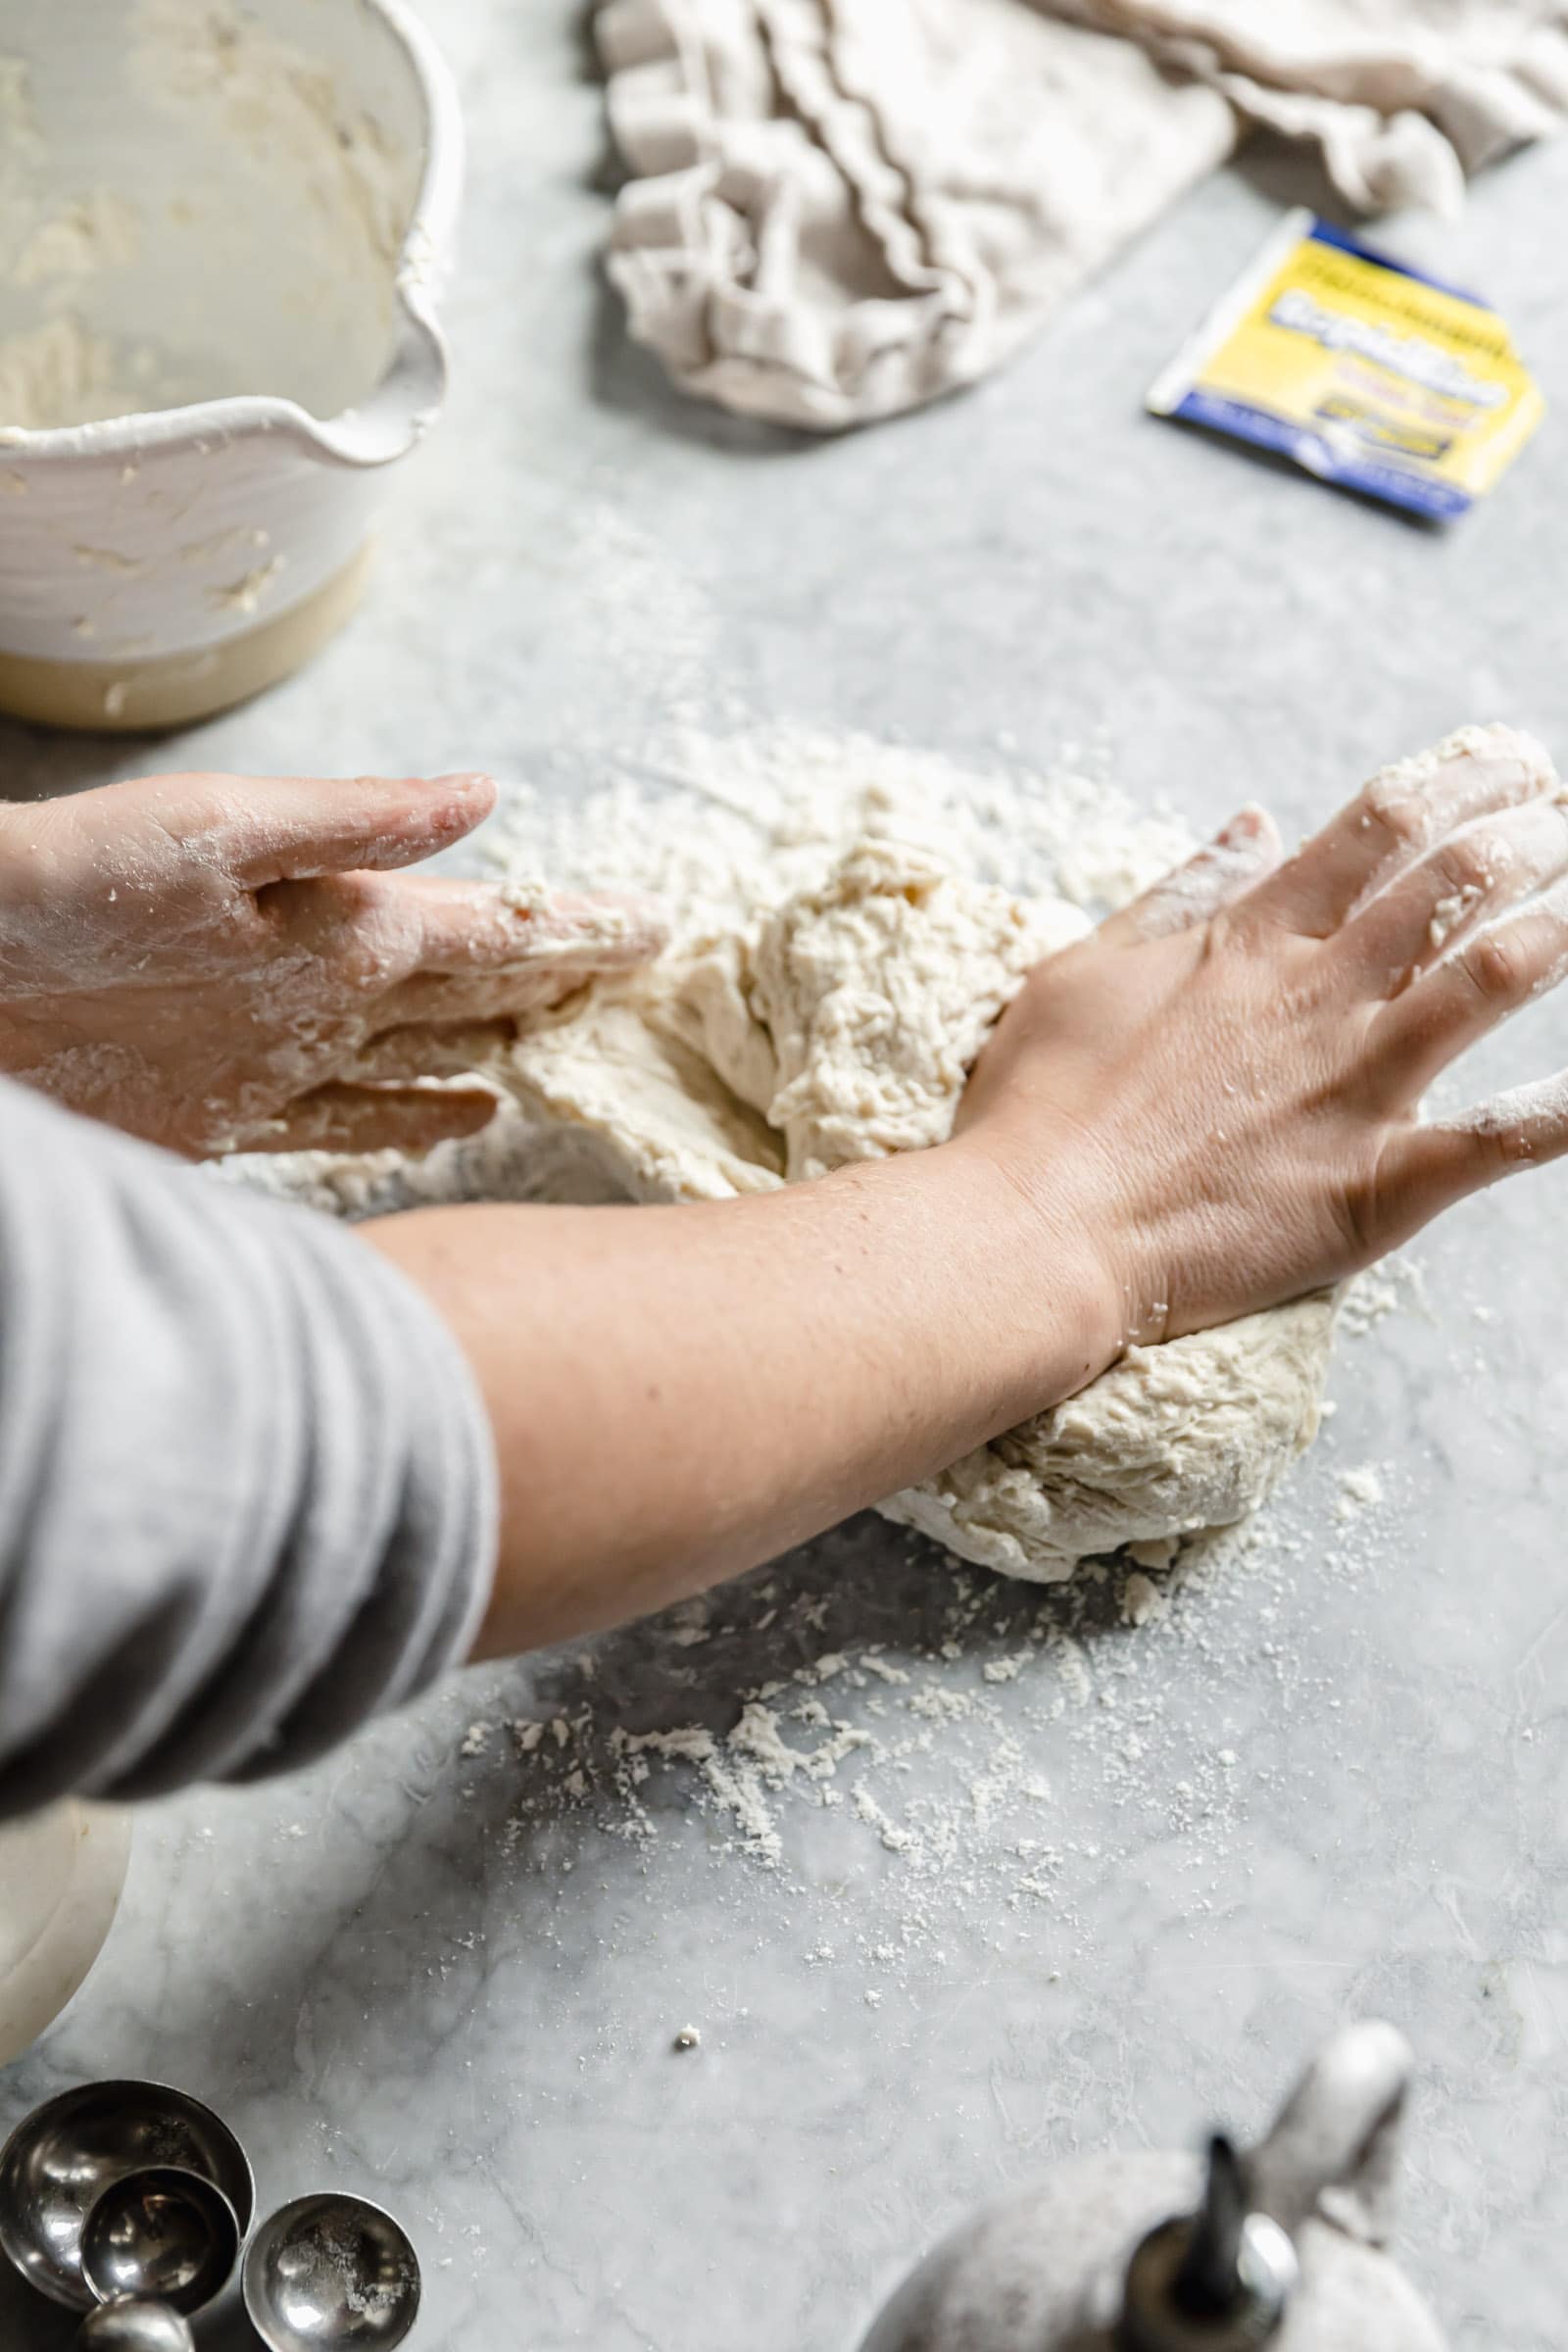 kneading pizza dough by hand